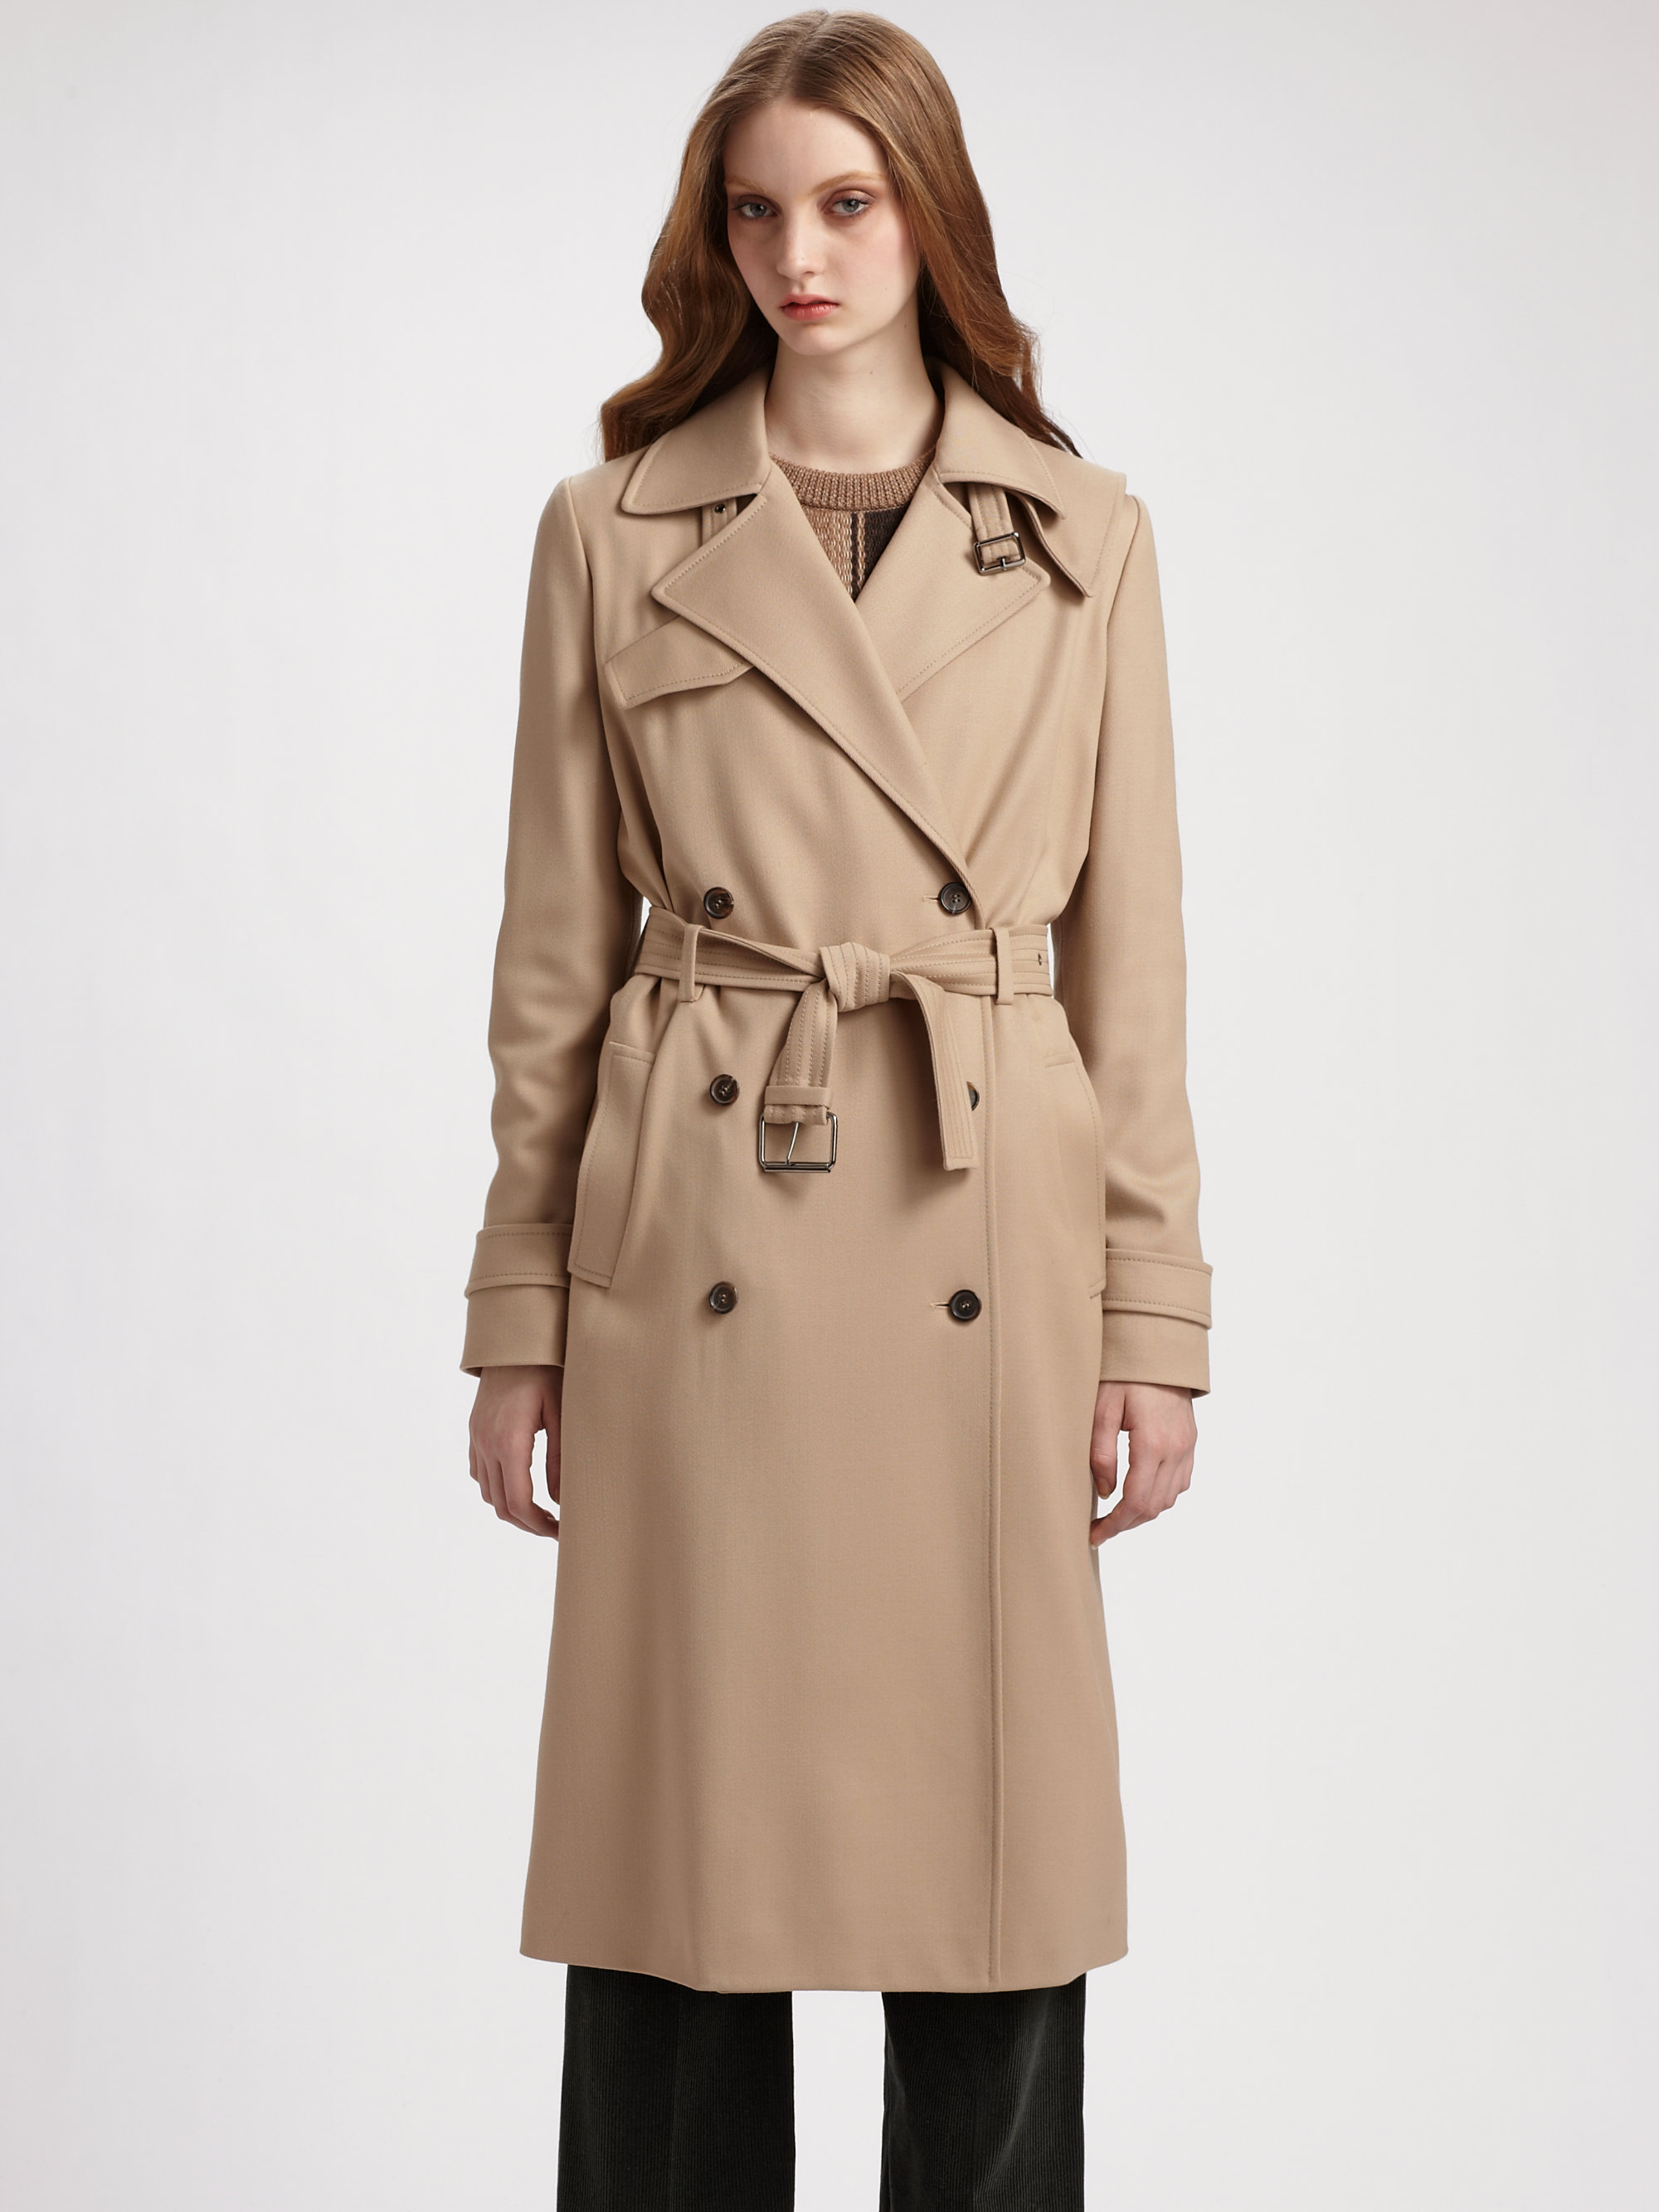 Lyst - Chloé Wool Drill Trenchcoat in Natural